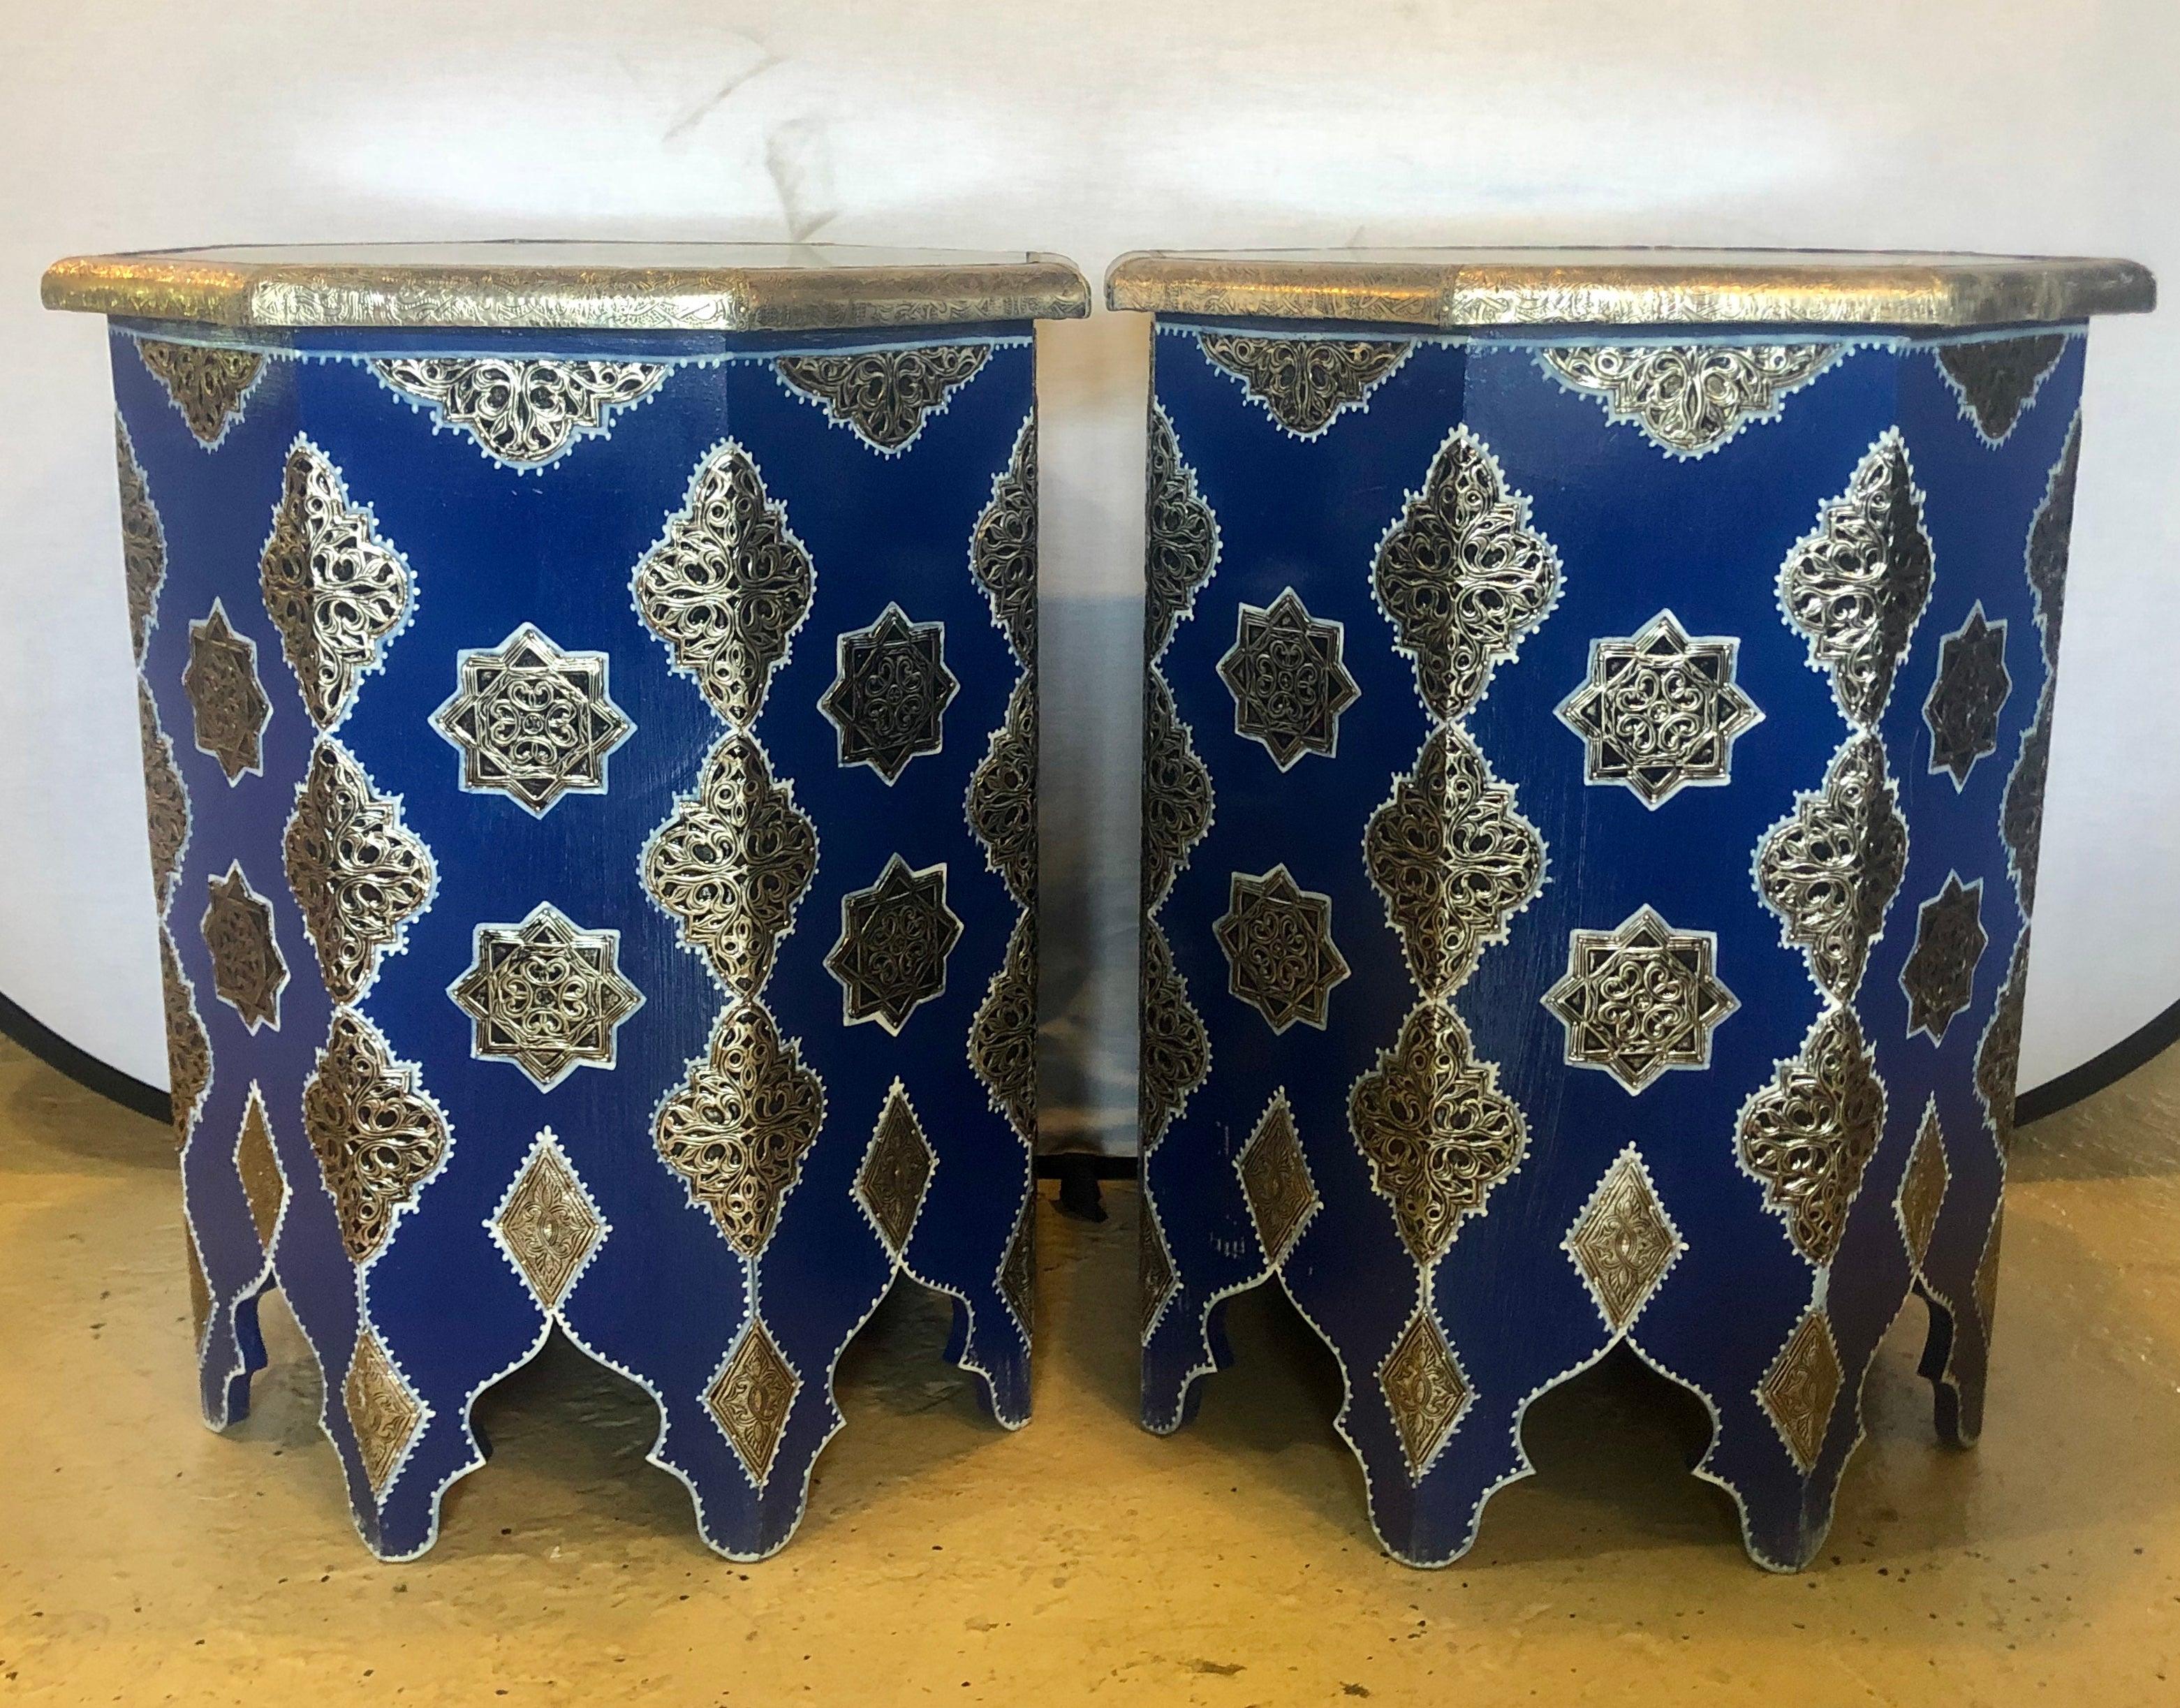 Fine pair of large Moroccan white brass and gold brass inlaid side or center tables in blue majorelle. Inspired by the legendary Yves Saint Laurent garden in Marrakech, this charming octagonal shaped side table or will add unique style and